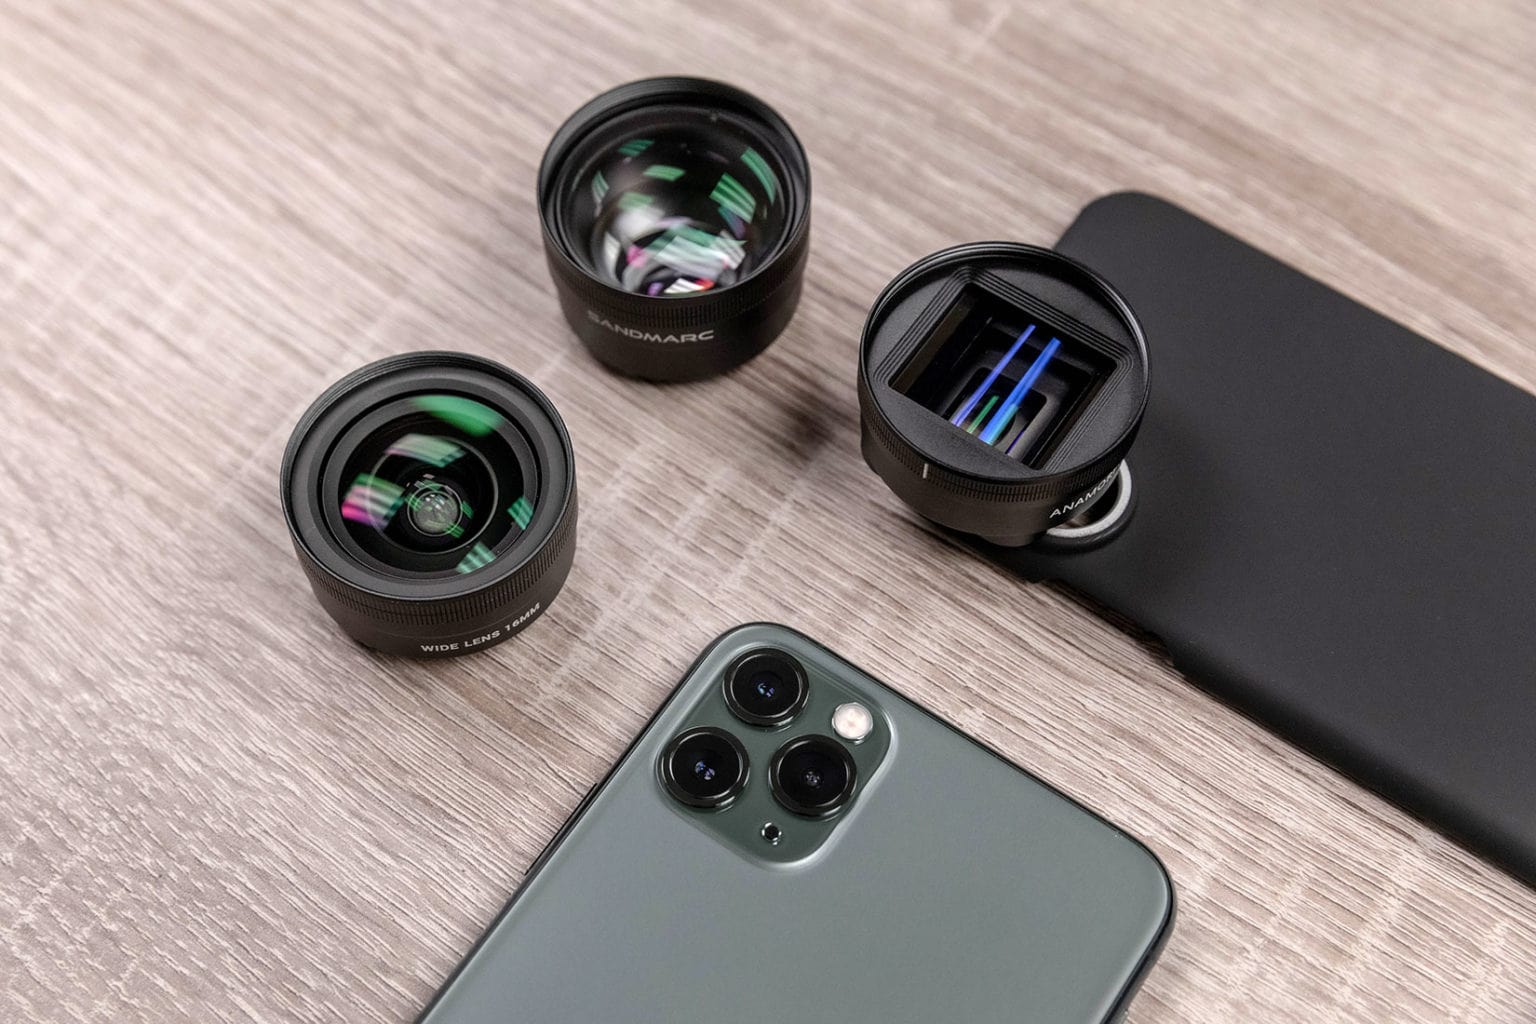 Sandmarc lenses and cases for the iPhone 11 line